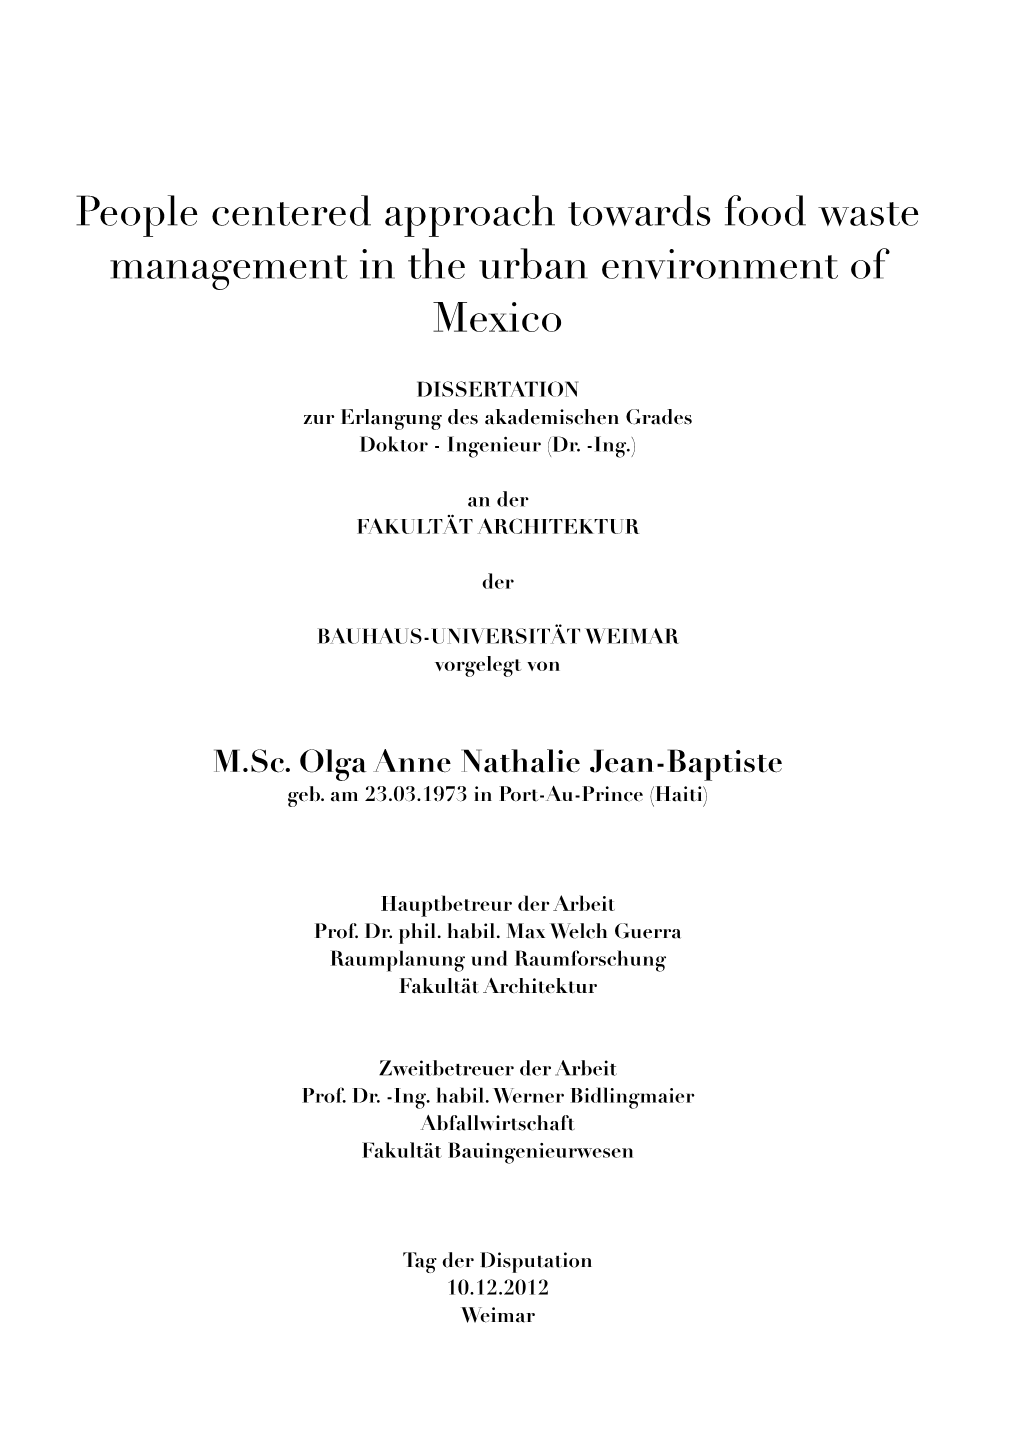 People Centered Approach Towards Food Waste Management in the Urban Environment of Mexico